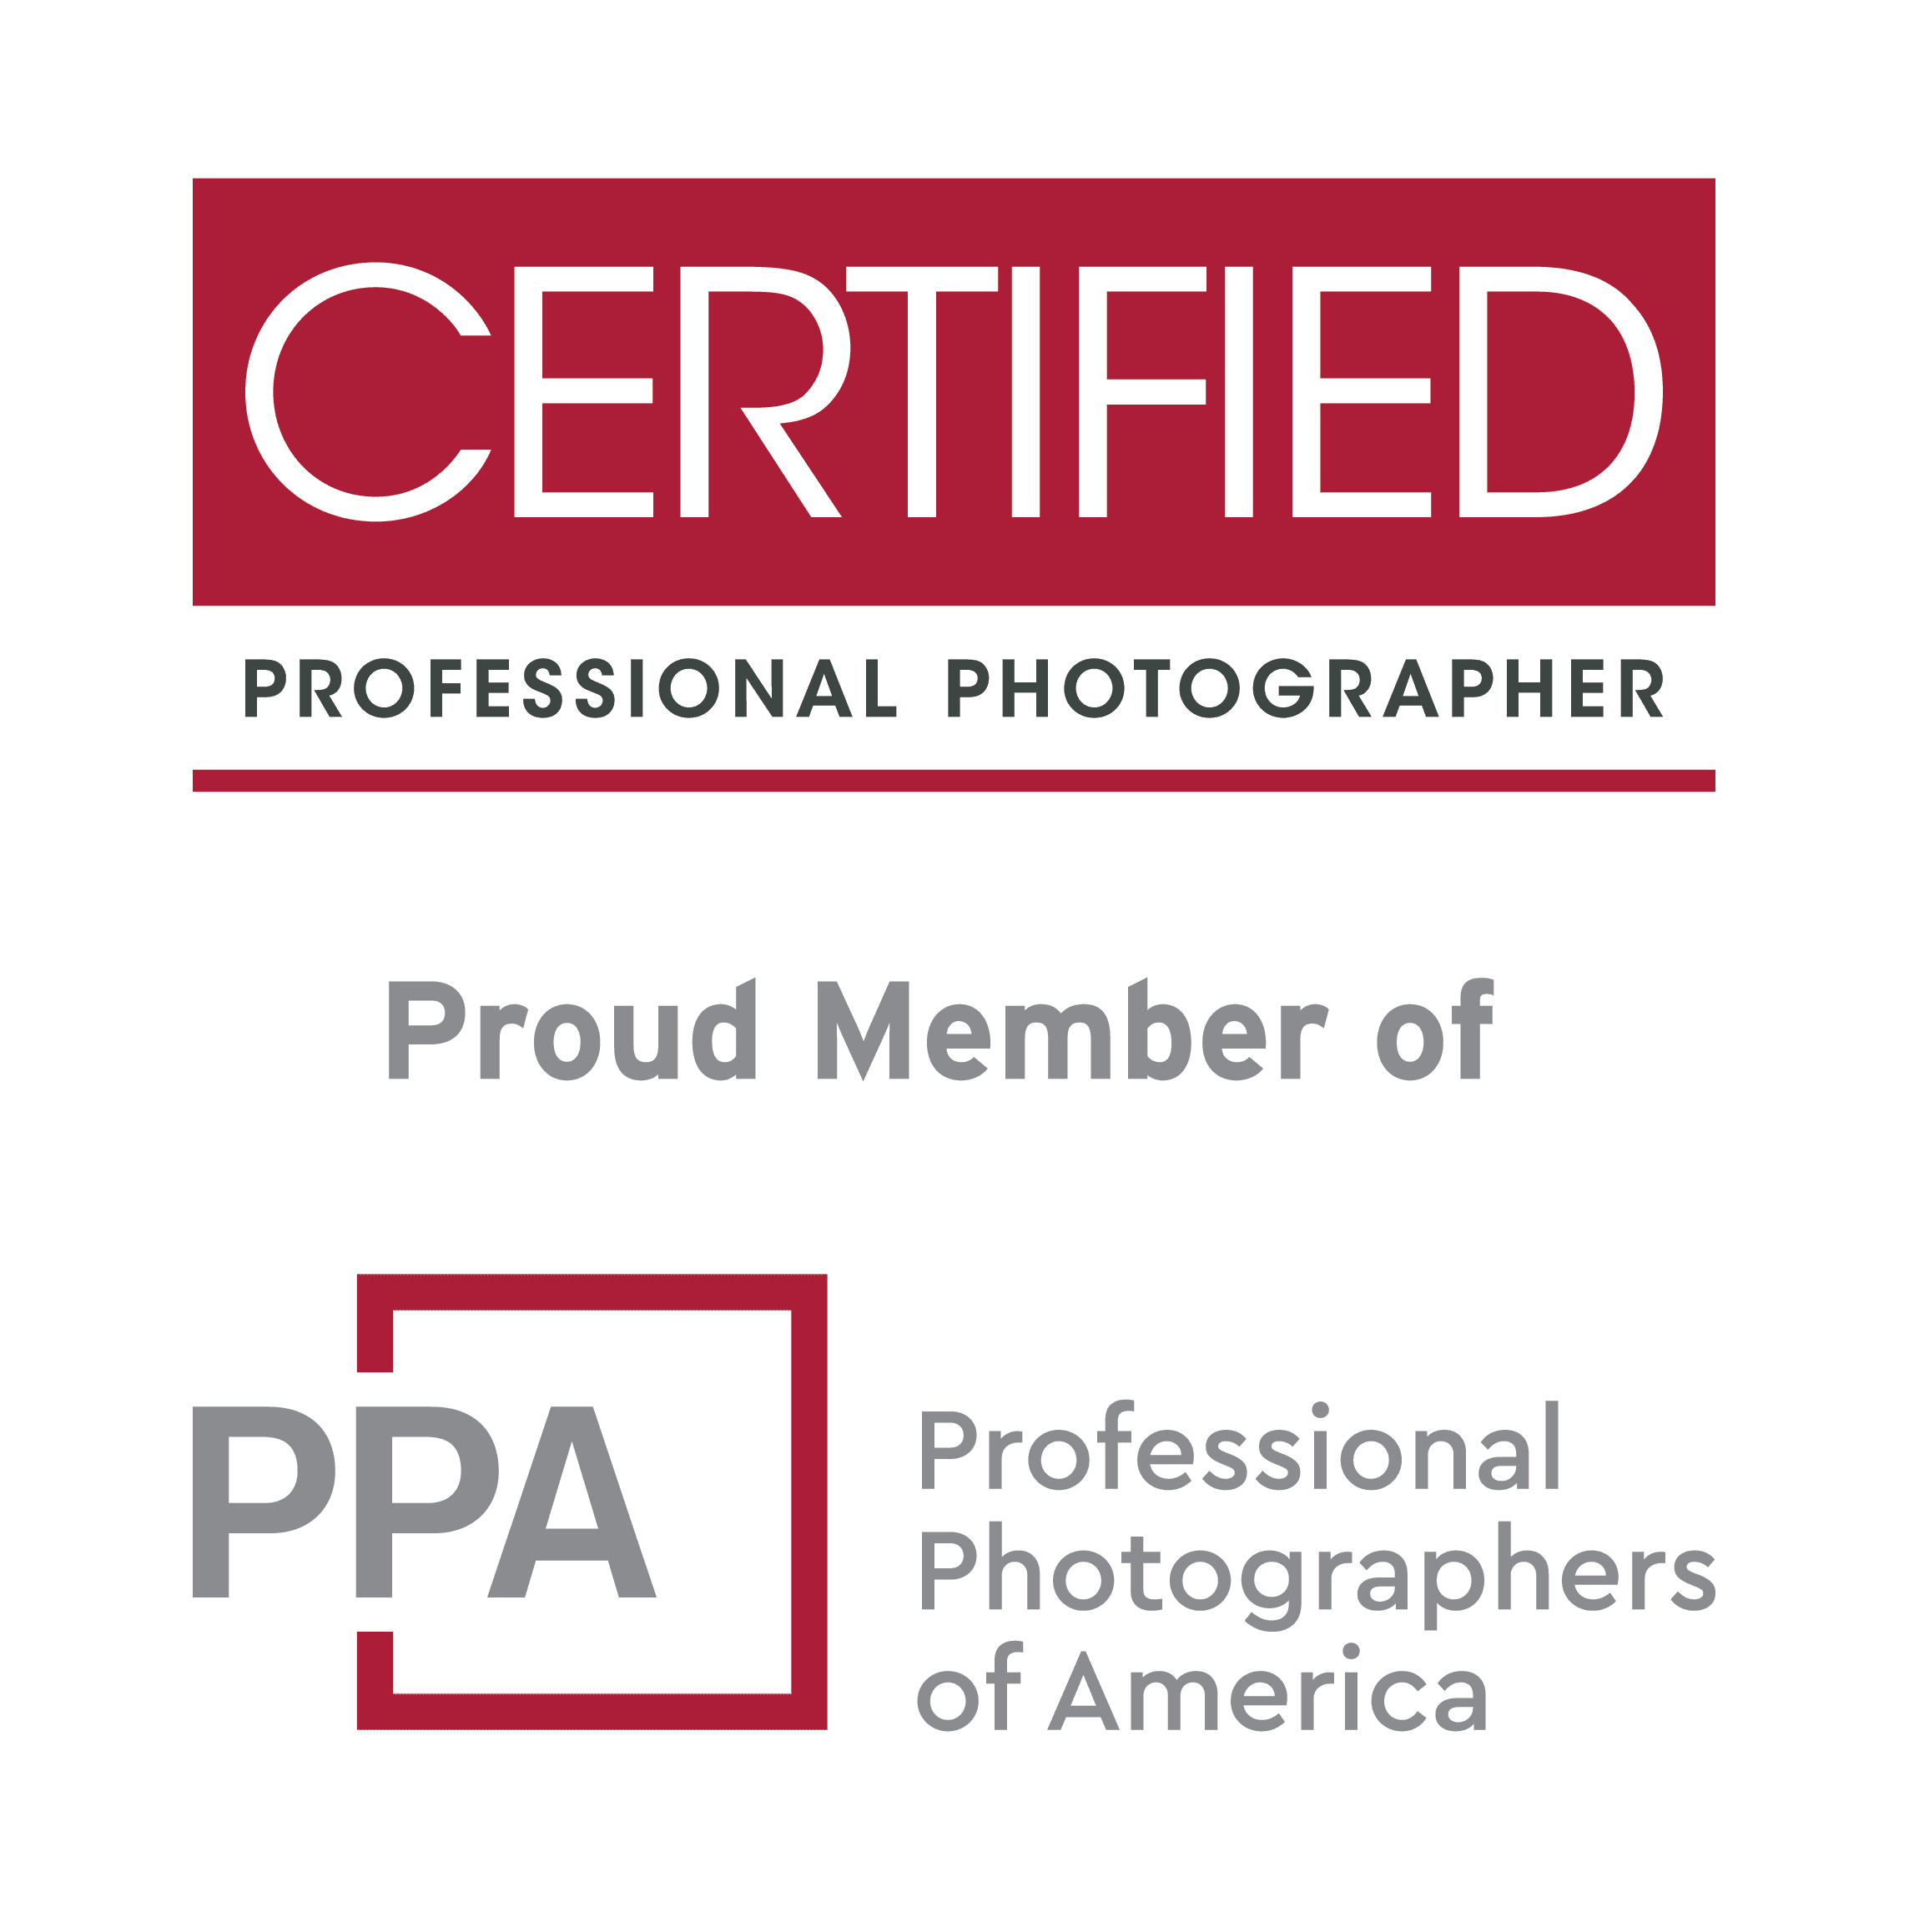 ProClicks School & Sports Photography is a proud member of Professional Photographers of America and a PPA Certified Professional Photographer.